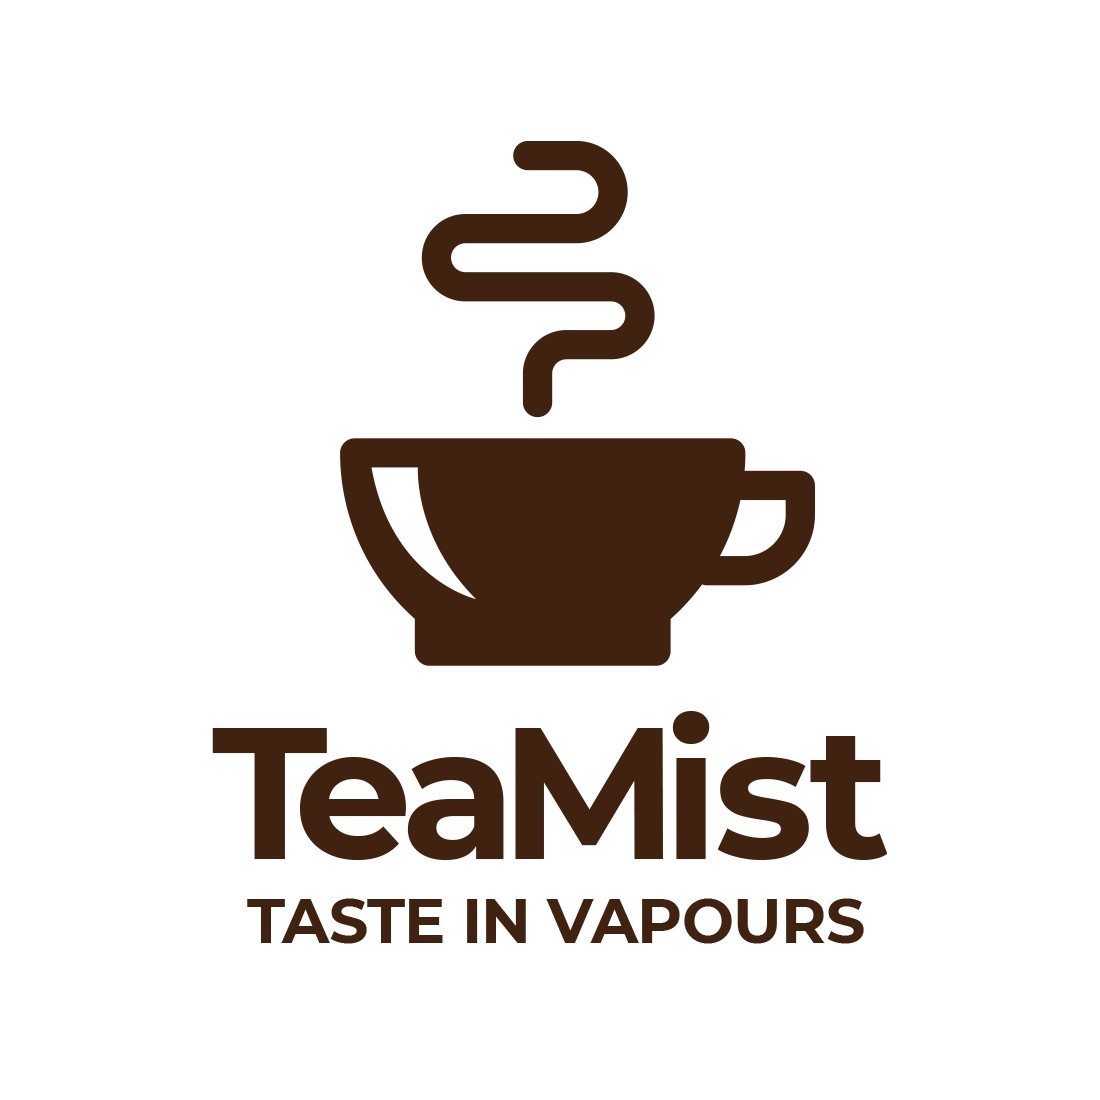 This logo gives a modern and minimal vibe for a coffee or a tea brand or shop keeping in view the modern needs for a logo.